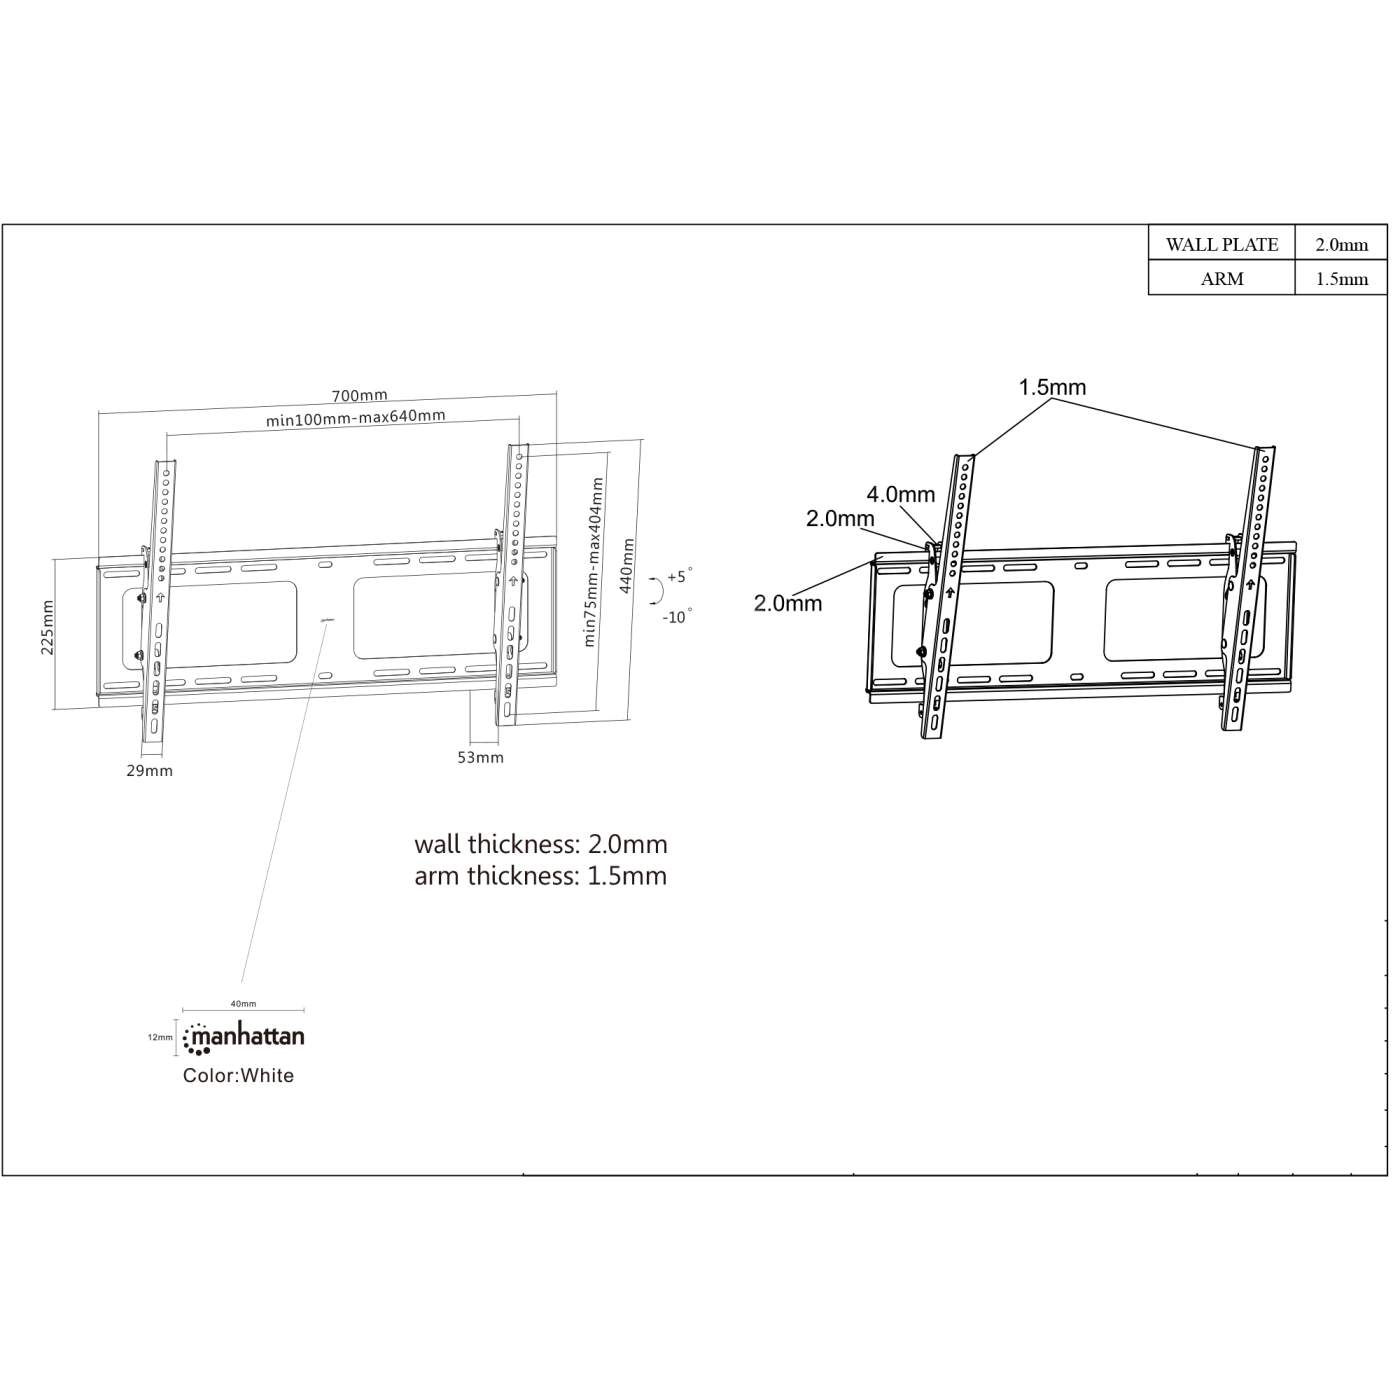 Universal Flat-Panel TV Tilting Wall Mount with Post-Leveling Adjustment Image 7